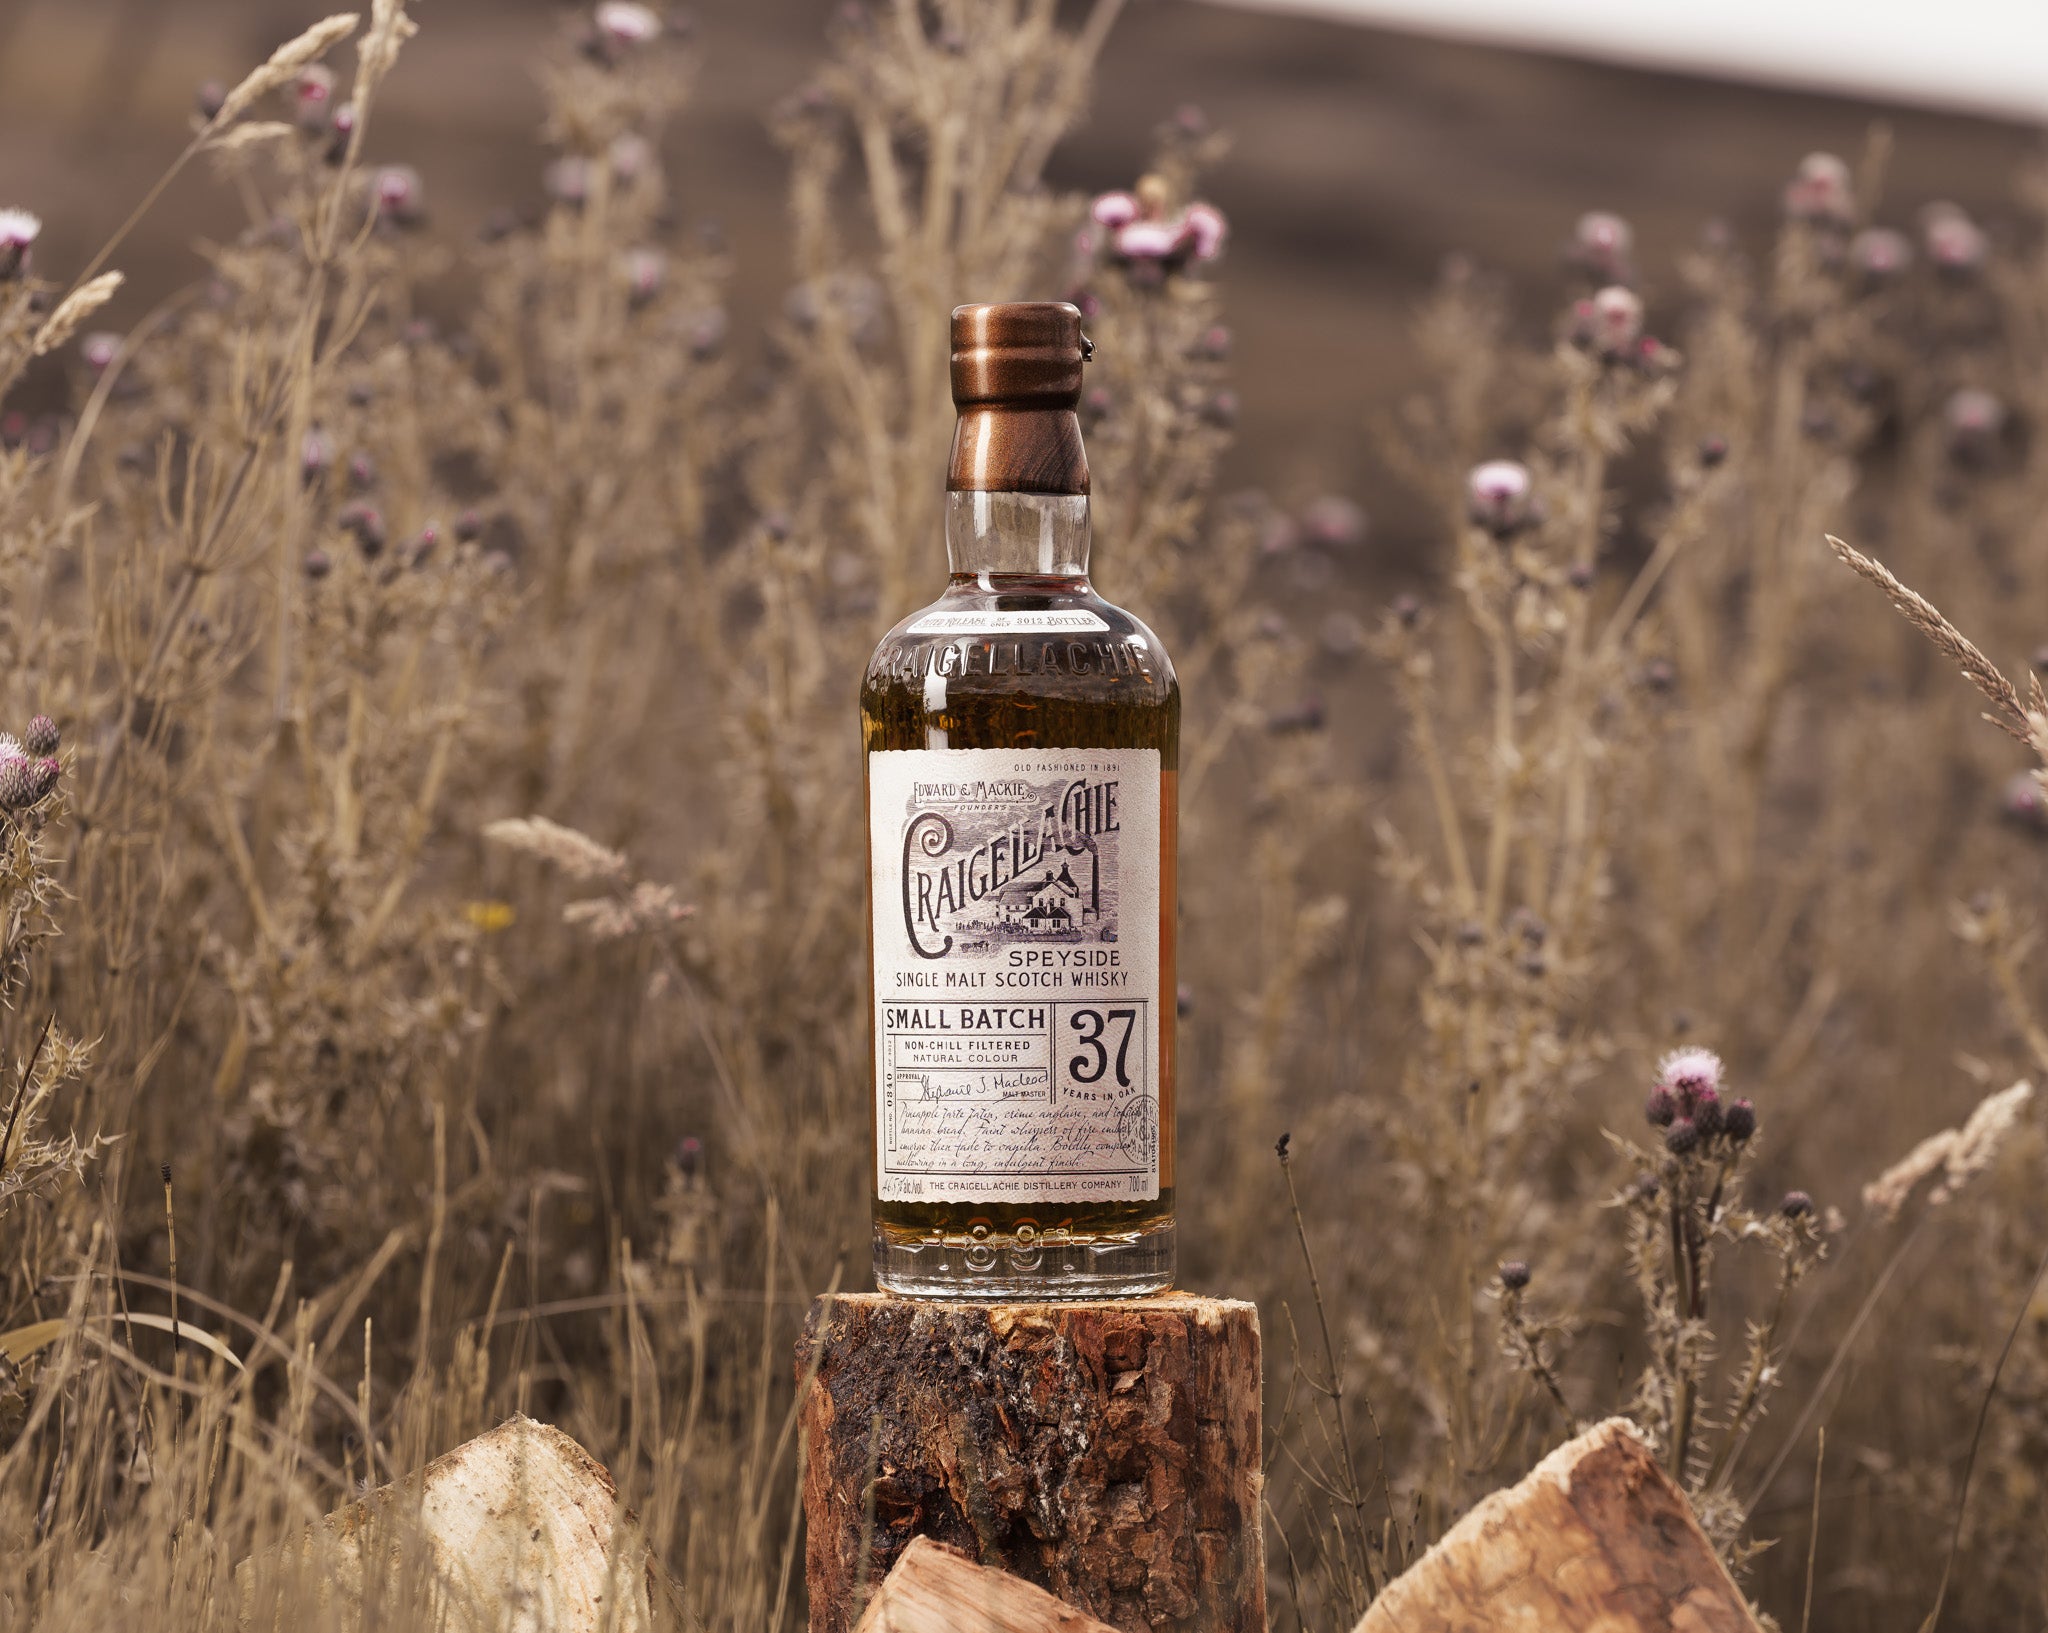 Craigellachie 37 Bottle Out In Nature